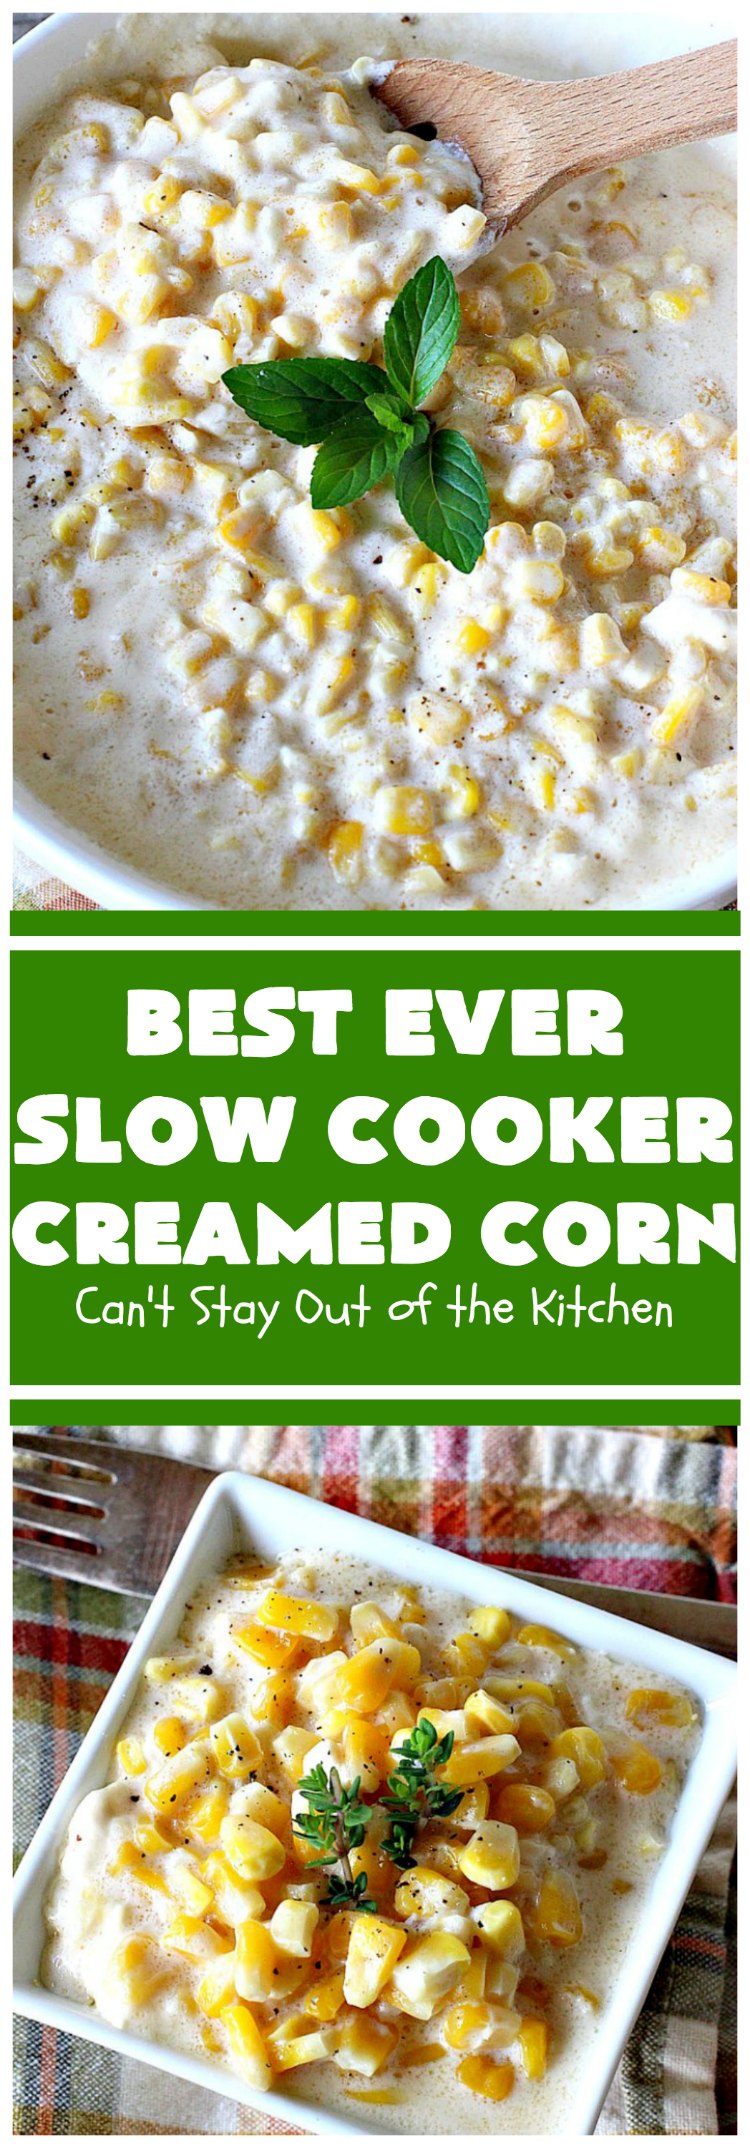 Best Ever Slow Cooker Creamed Corn | Can't Stay Out of the Kitchen